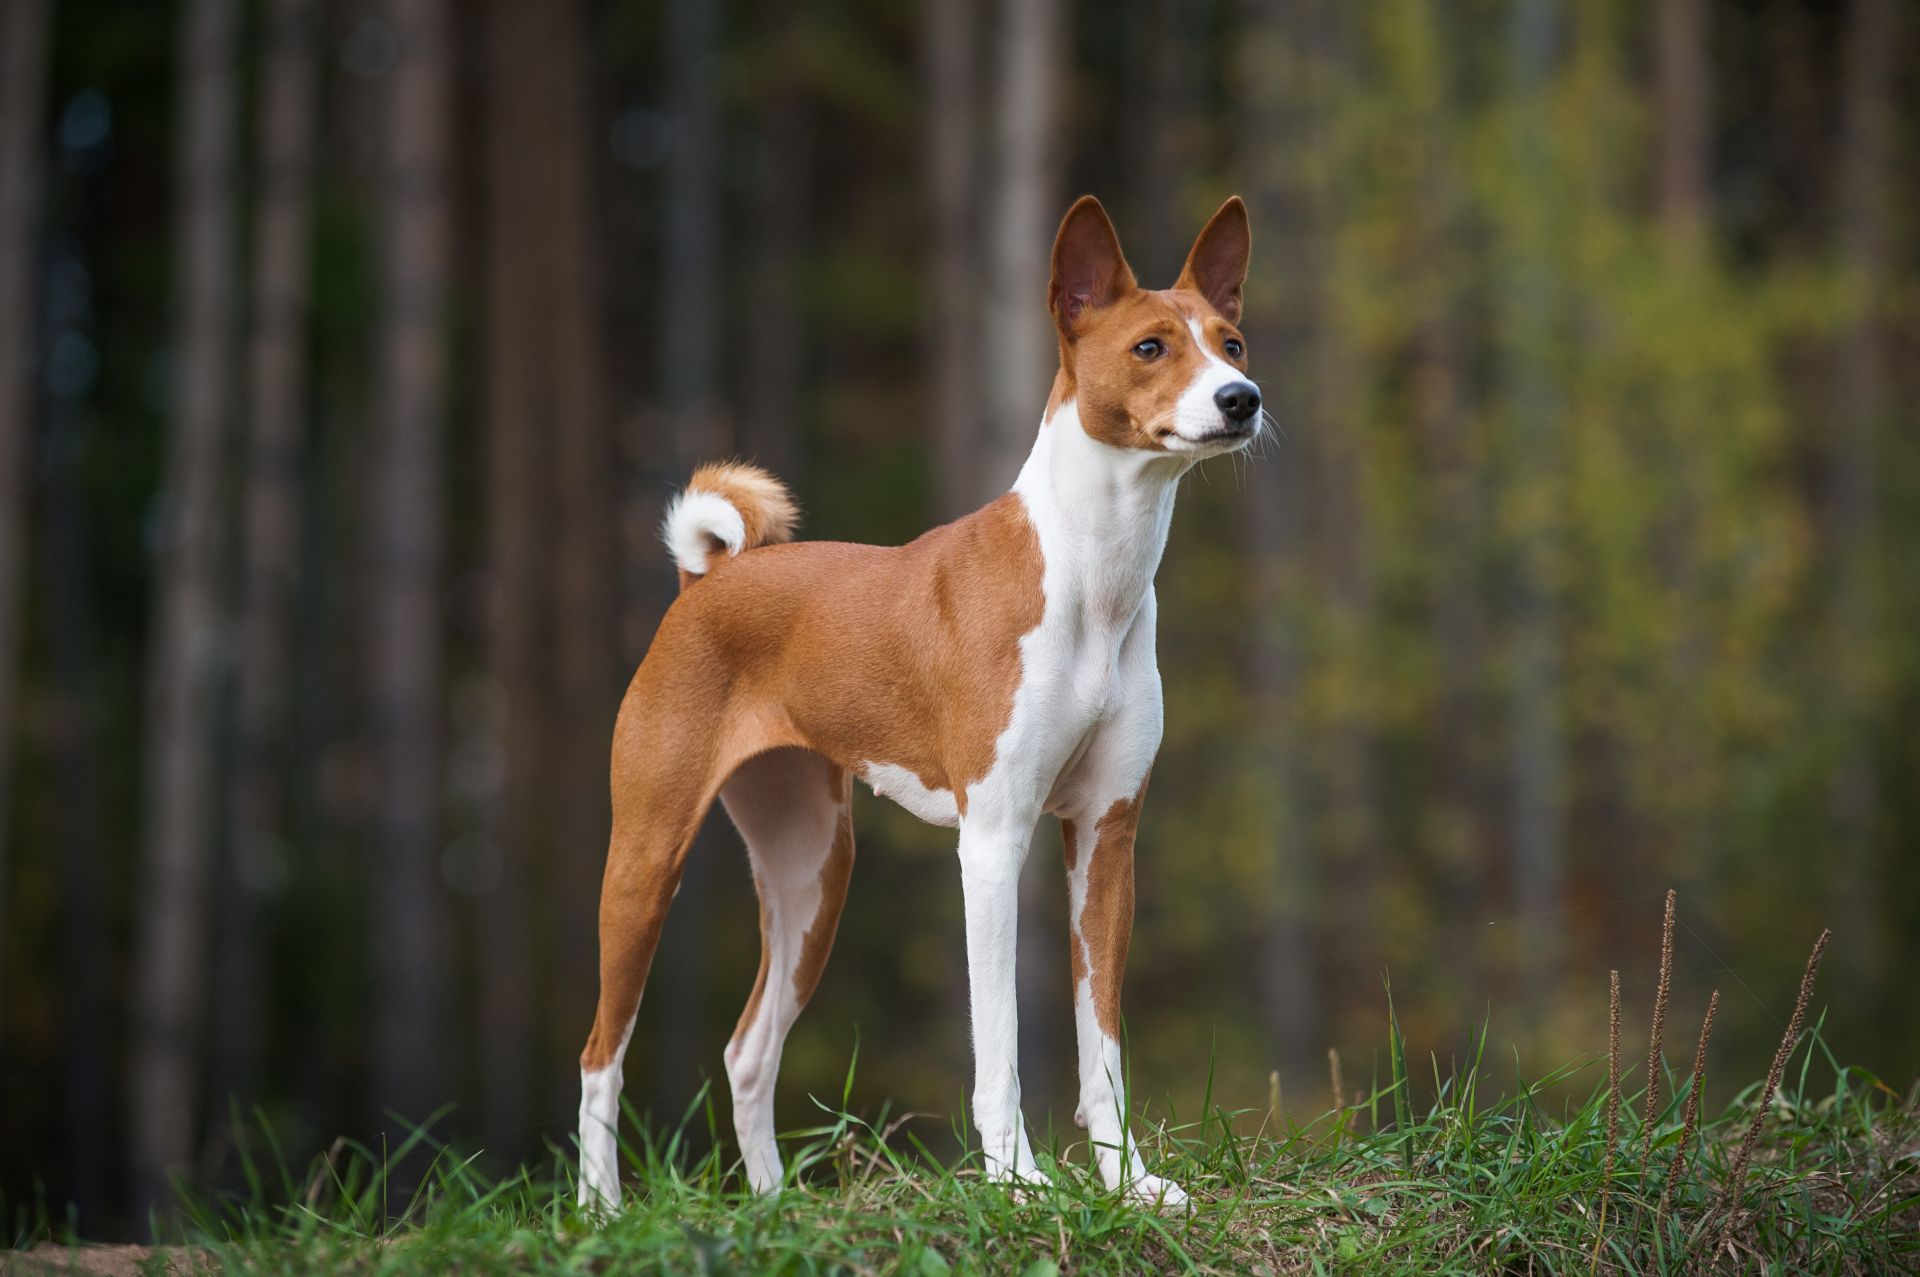 <p>                     The Basenji is a small to medium-sized dog breed that originated in central Africa. Basenjis are hypoallergenic dogs with short coats that are also fastidious cleaners, so don't expect them to have a typical dog smell. They won't need to be groomed often, either. Basenjis are considered "barkless" dogs because they actually make sounds closer to a yodel. They are smart and independent dogs but can be very protective of their families.                   </p>